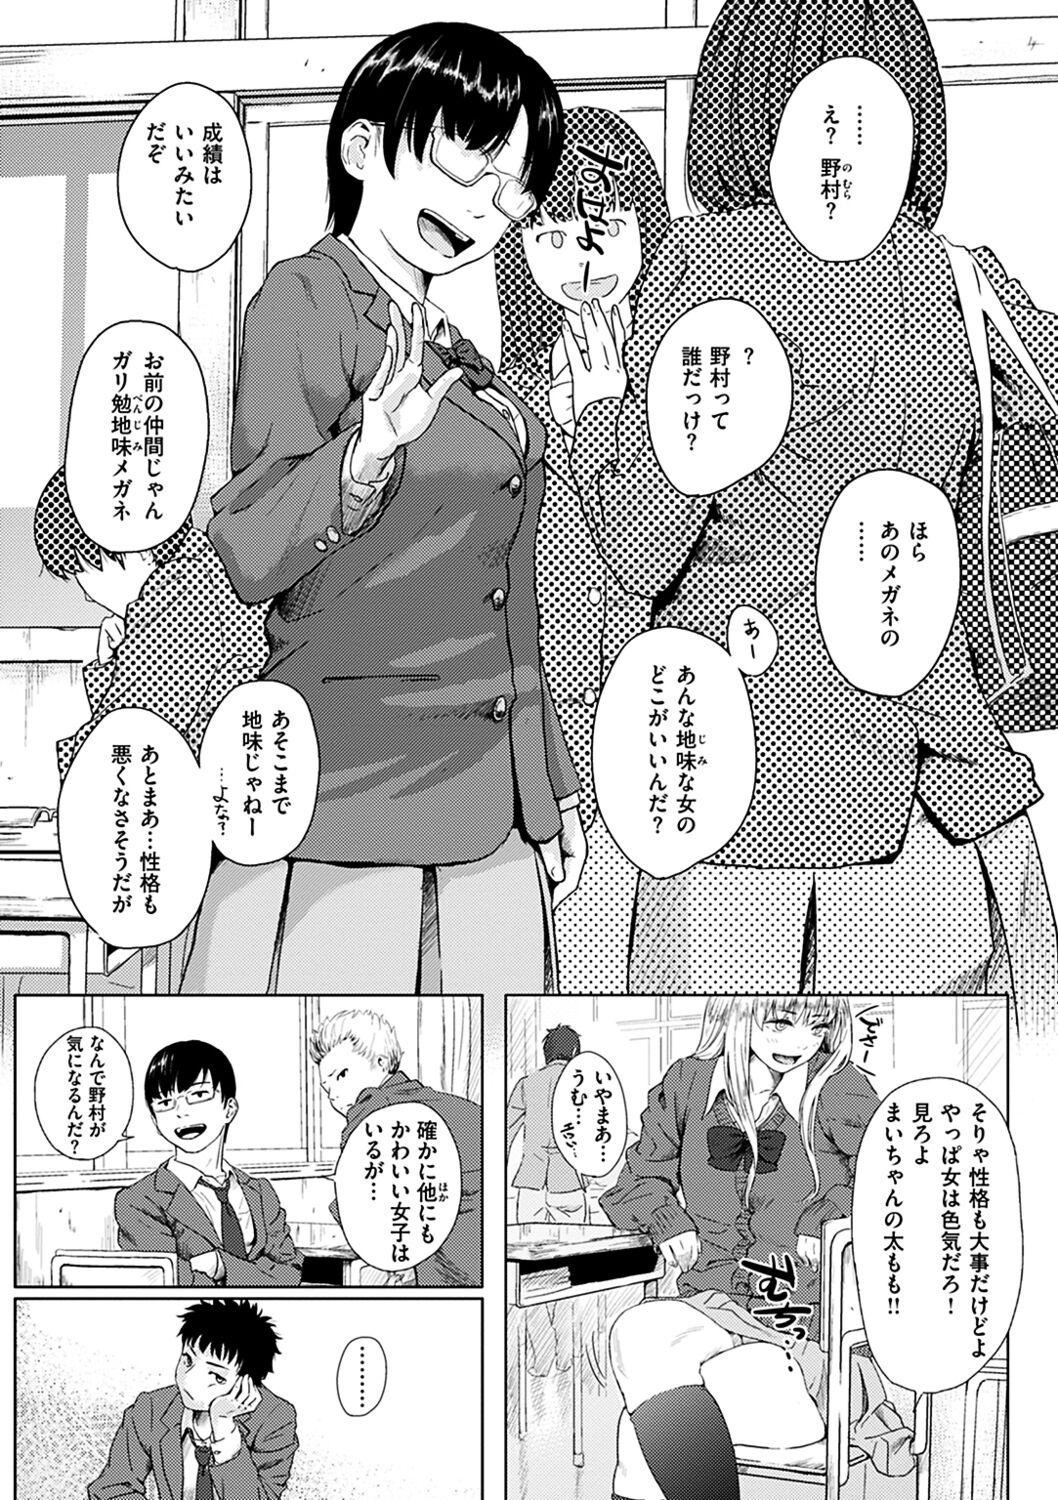 Speculum Kimi dake ni - I Only Love You... Ginger - Page 7